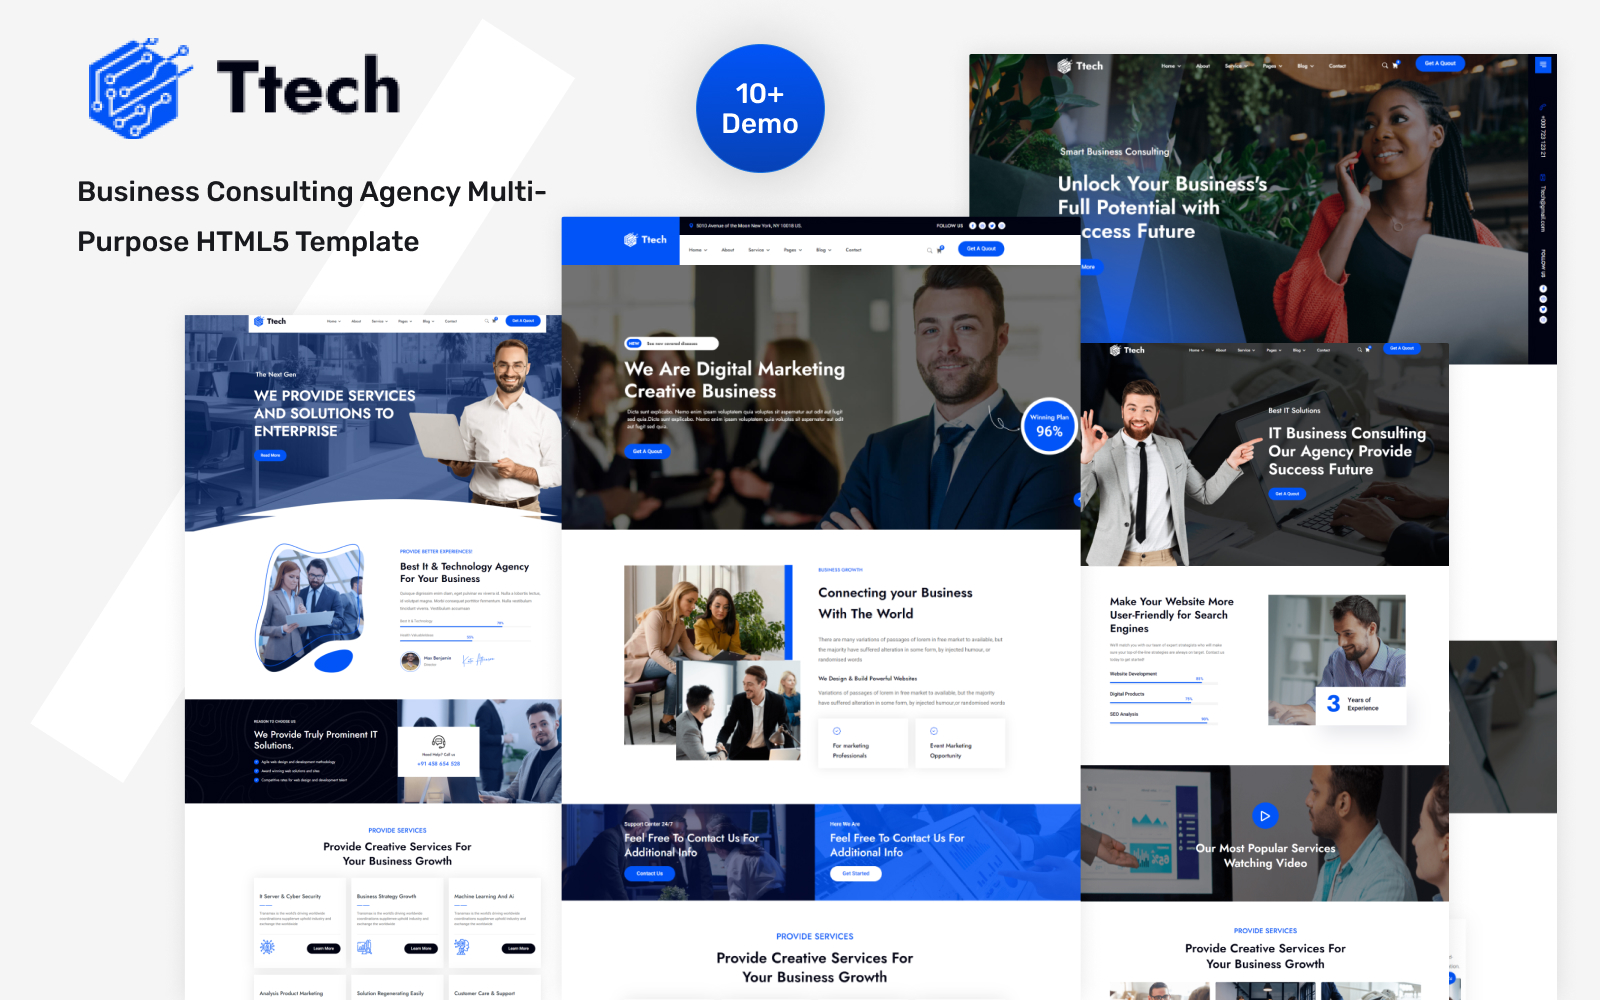 Ttech-Business Consulting Agency Multi-Purpose HTML5 Template